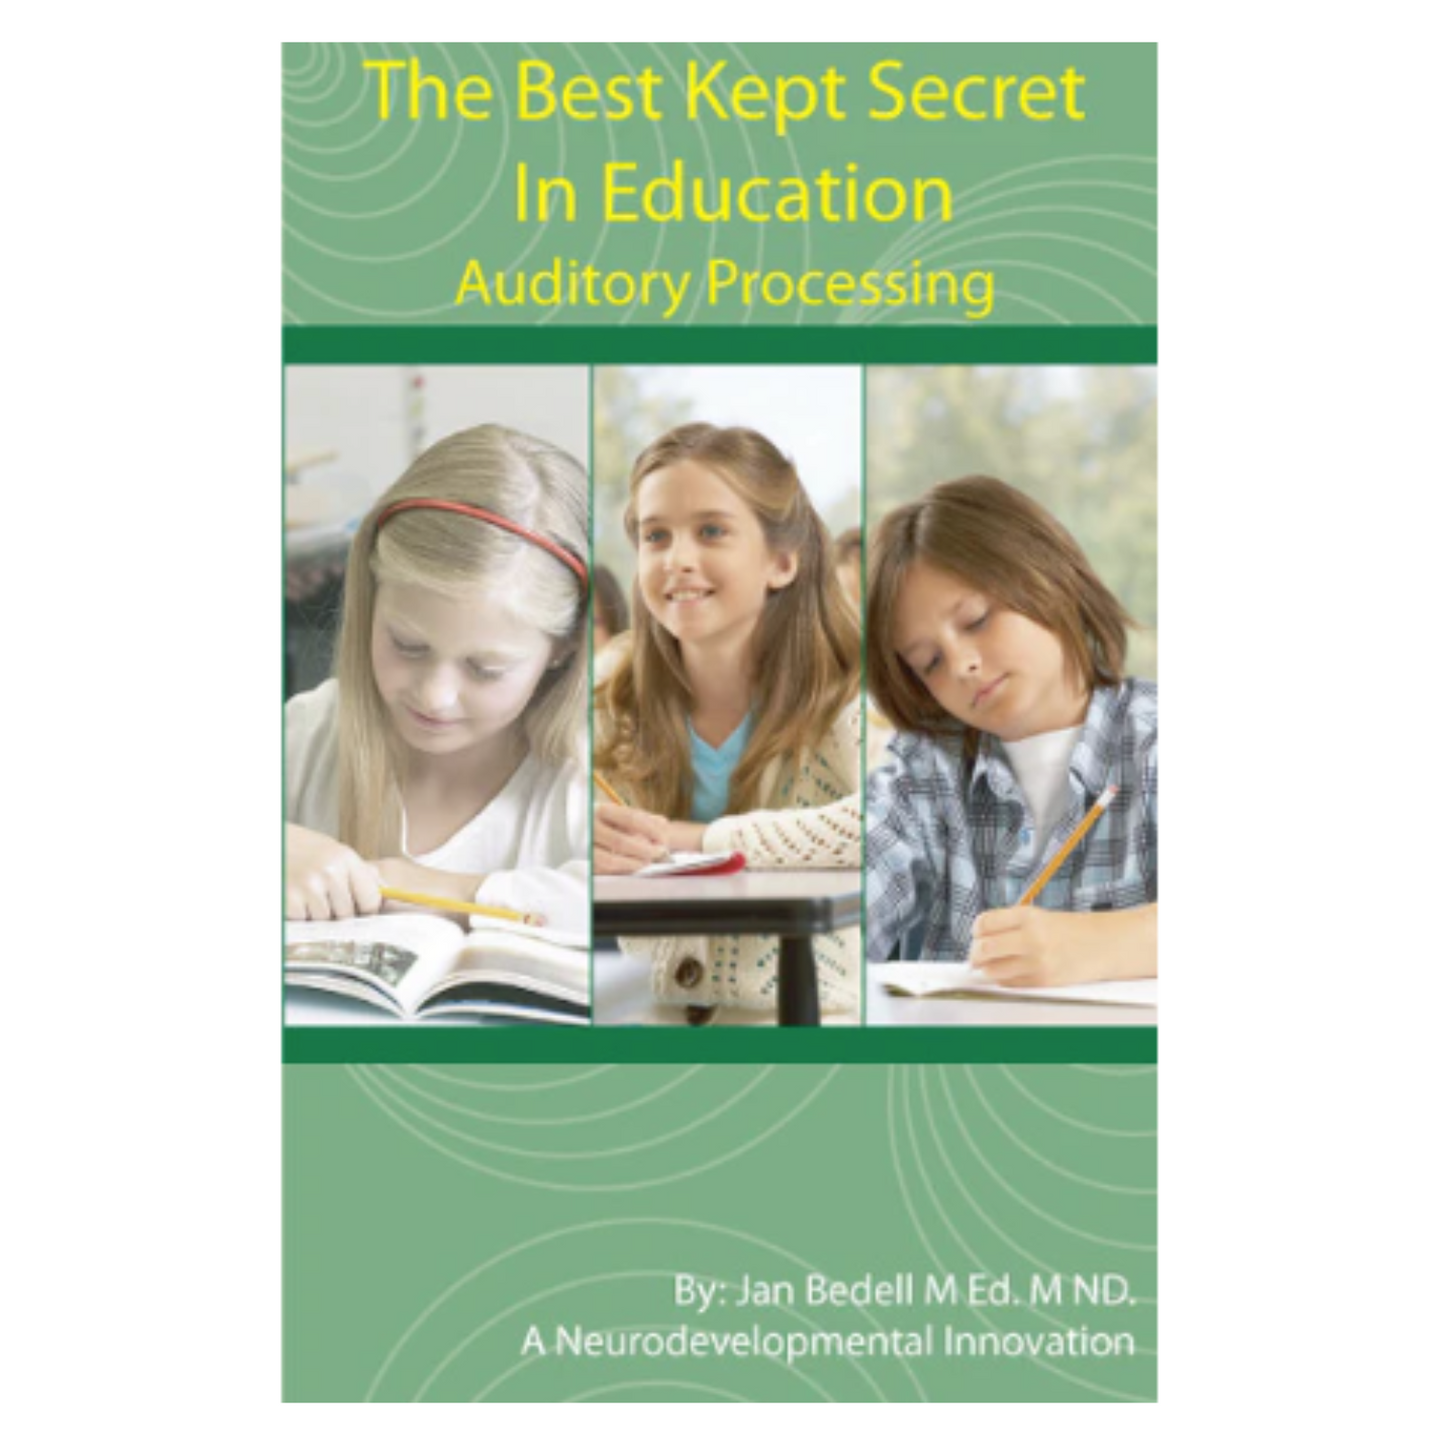 The Best Kept Secret in Education, Auditory Processing - Download